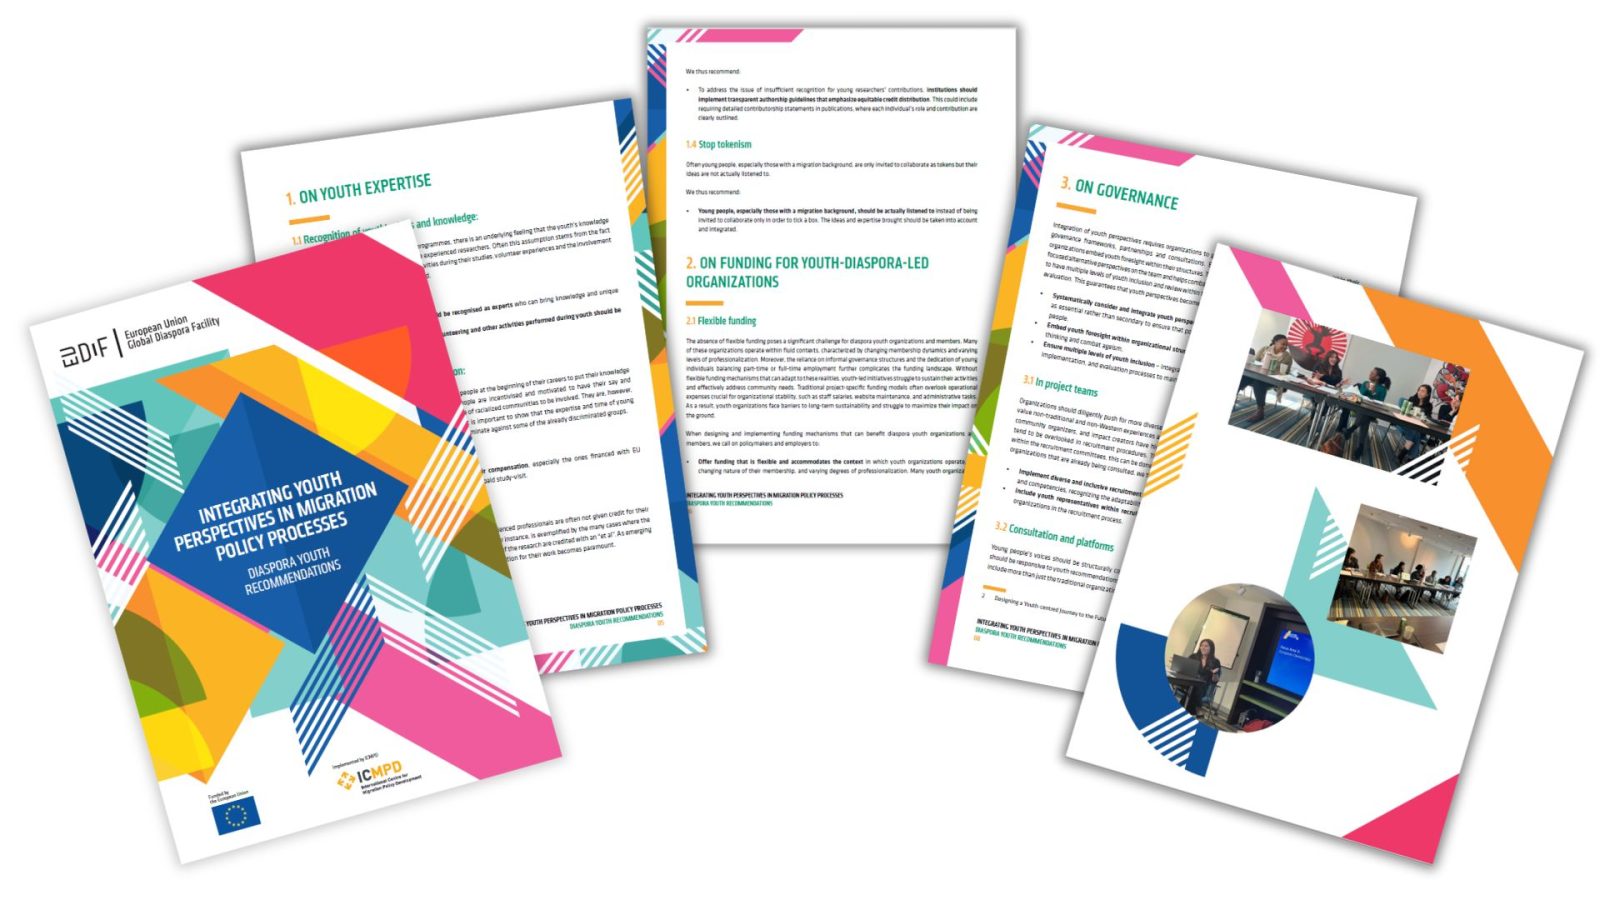 Pages from the diaspora youth recommendations report.